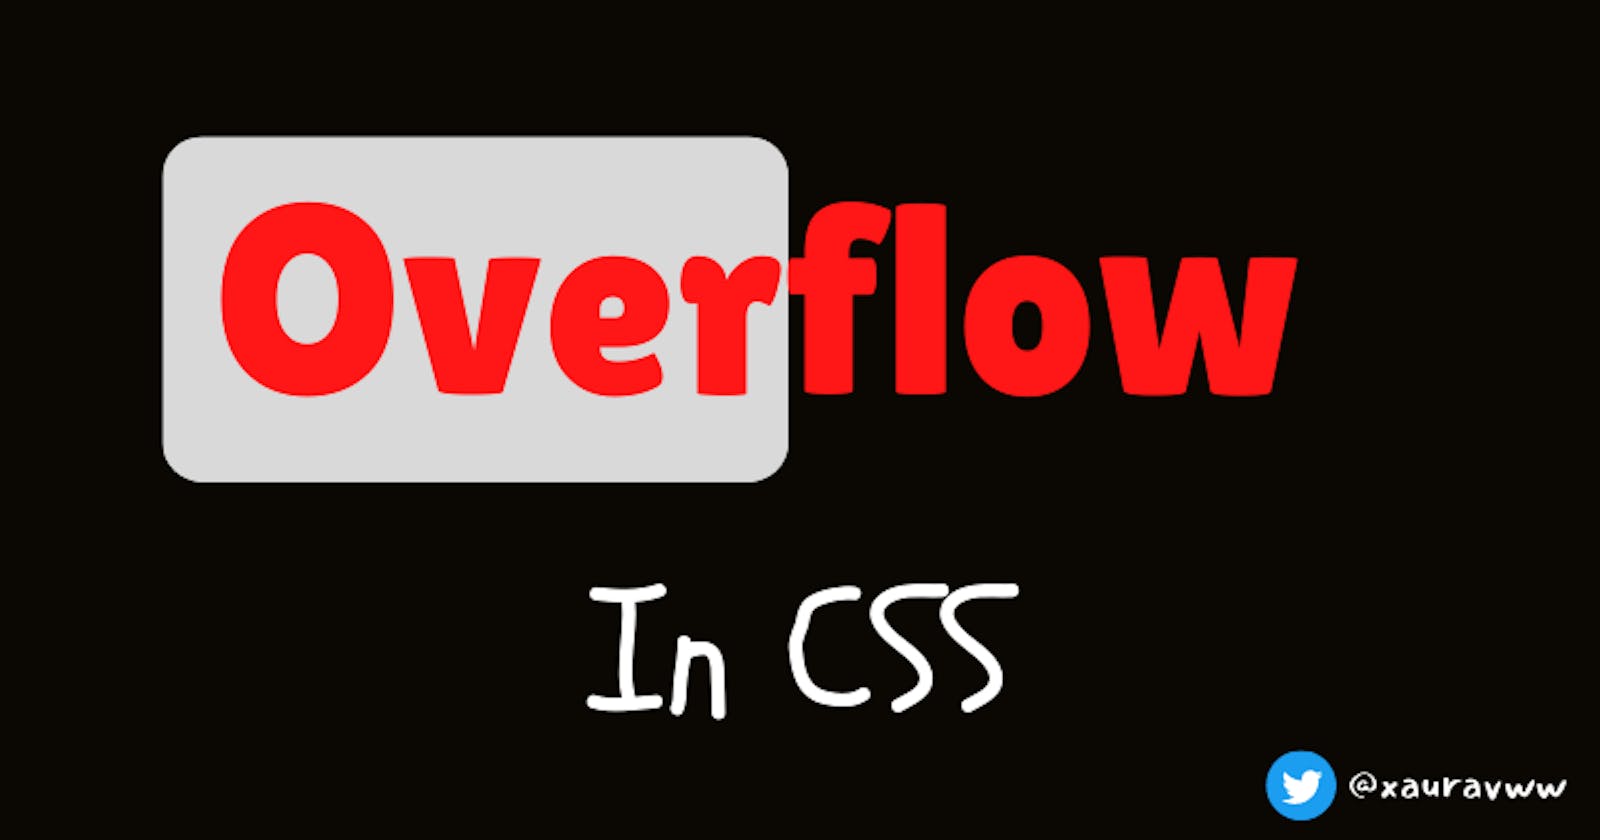 OverFlow Property in CSS